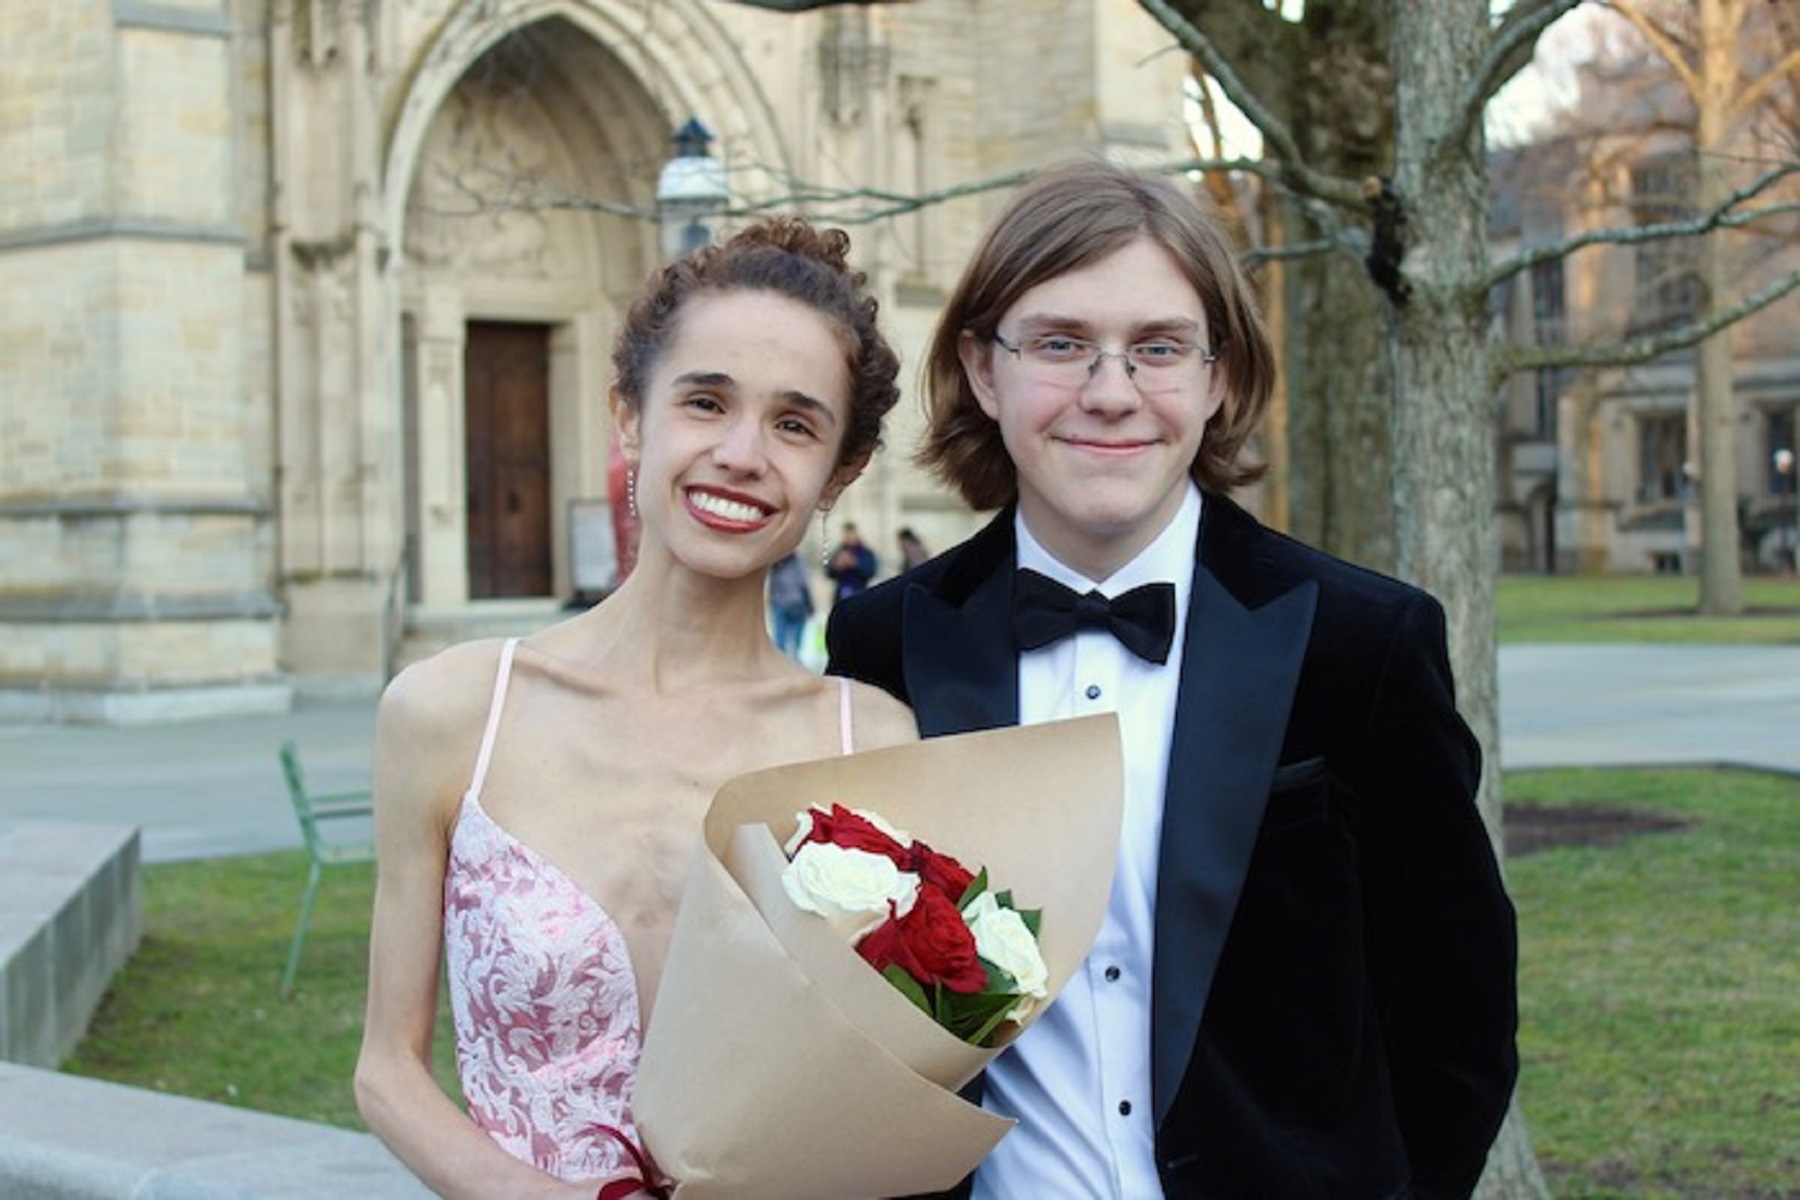 Prom photo of me and my date formerly dressed for prom